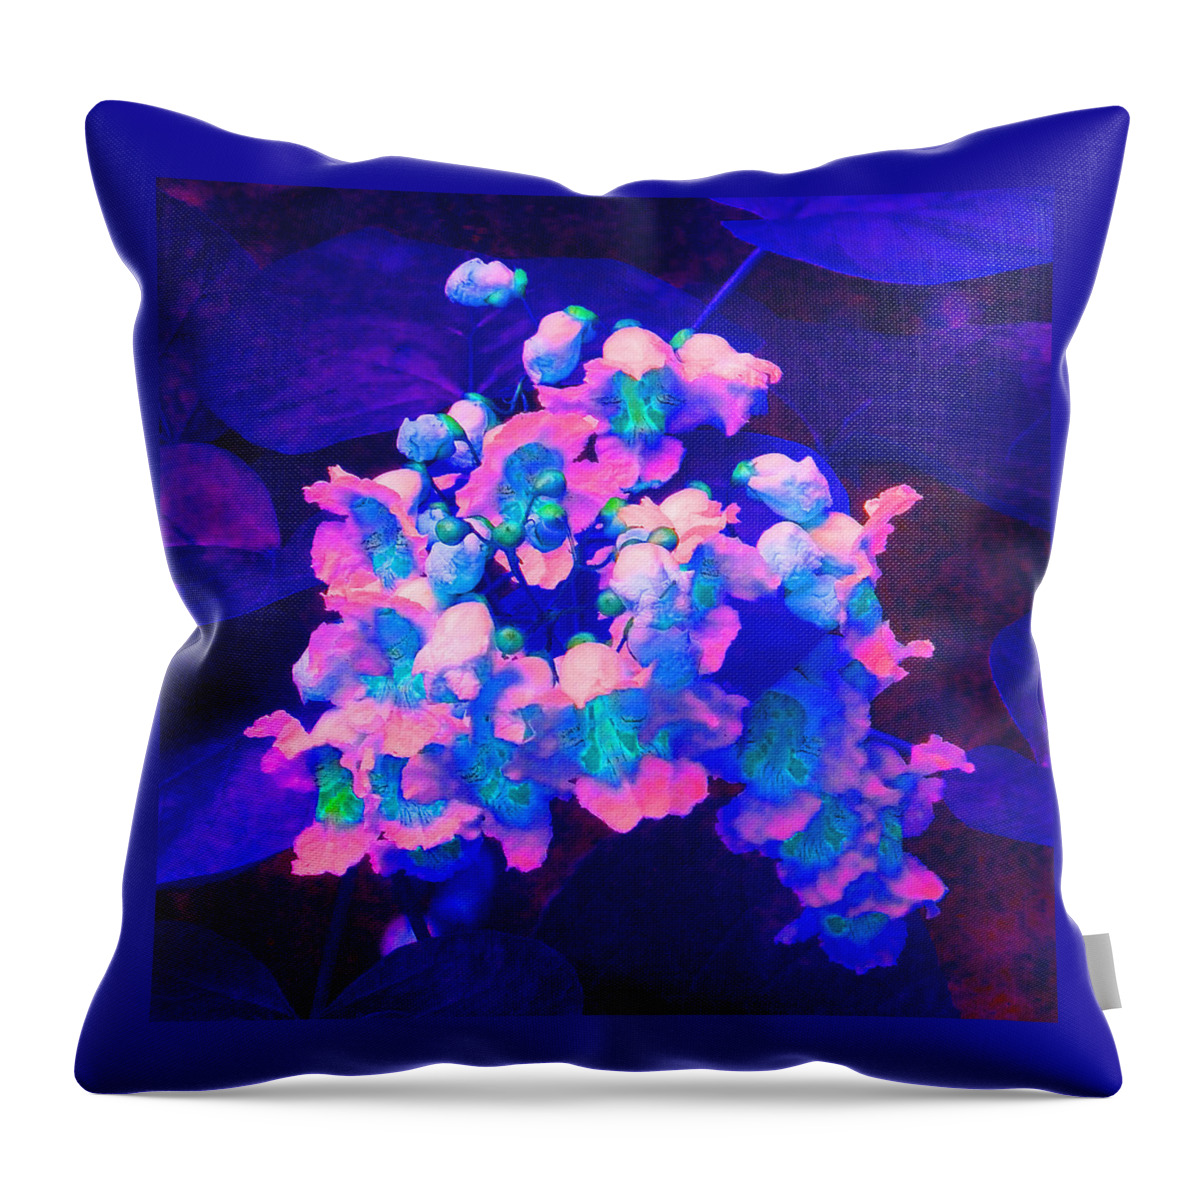 Fantasy Throw Pillow featuring the photograph Fantasy Flowers 5 by Margaret Saheed